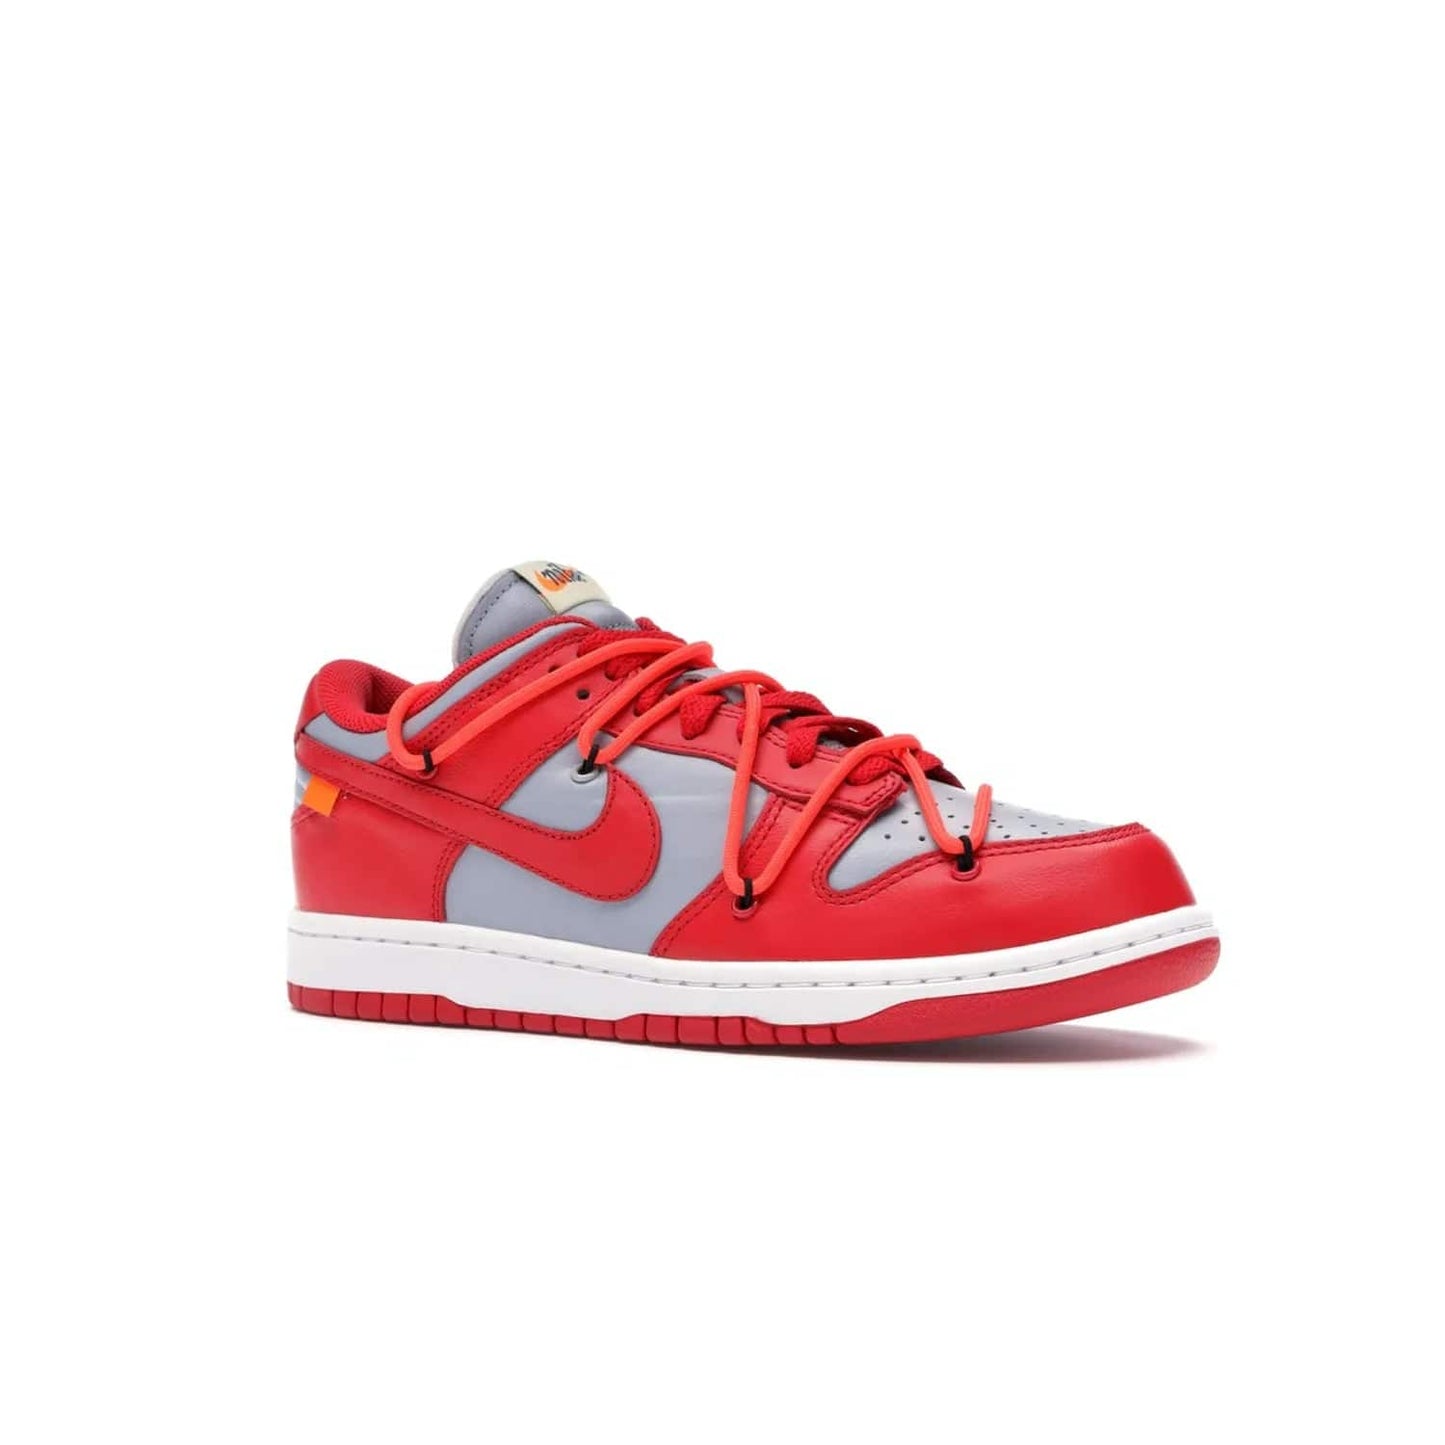 Nike Dunk Low Off-White University Red - Image 4 - Only at www.BallersClubKickz.com - The Nike Dunk Low Off-White University Red offers tribute to classic Nike Basketball silhouettes. Features include wolf grey leather, university red overlays, zip-ties, and Off-White text. Perfect for any sneaker fan, these stylish sneakers released in December of 2019.